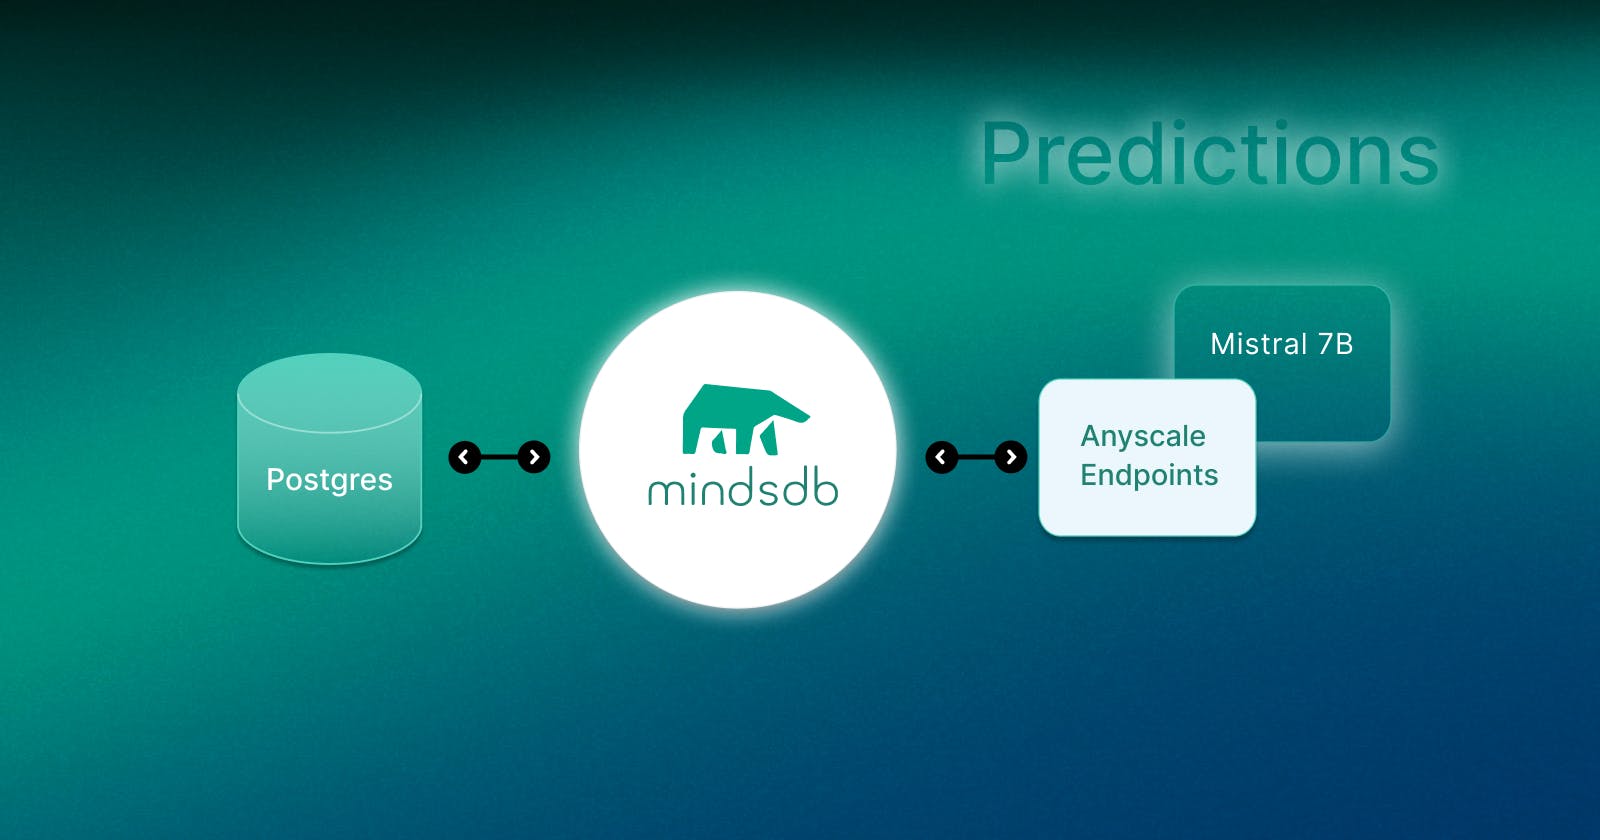 How to Fine-Tune an AI Model in MindsDB Using Anyscale Endpoints